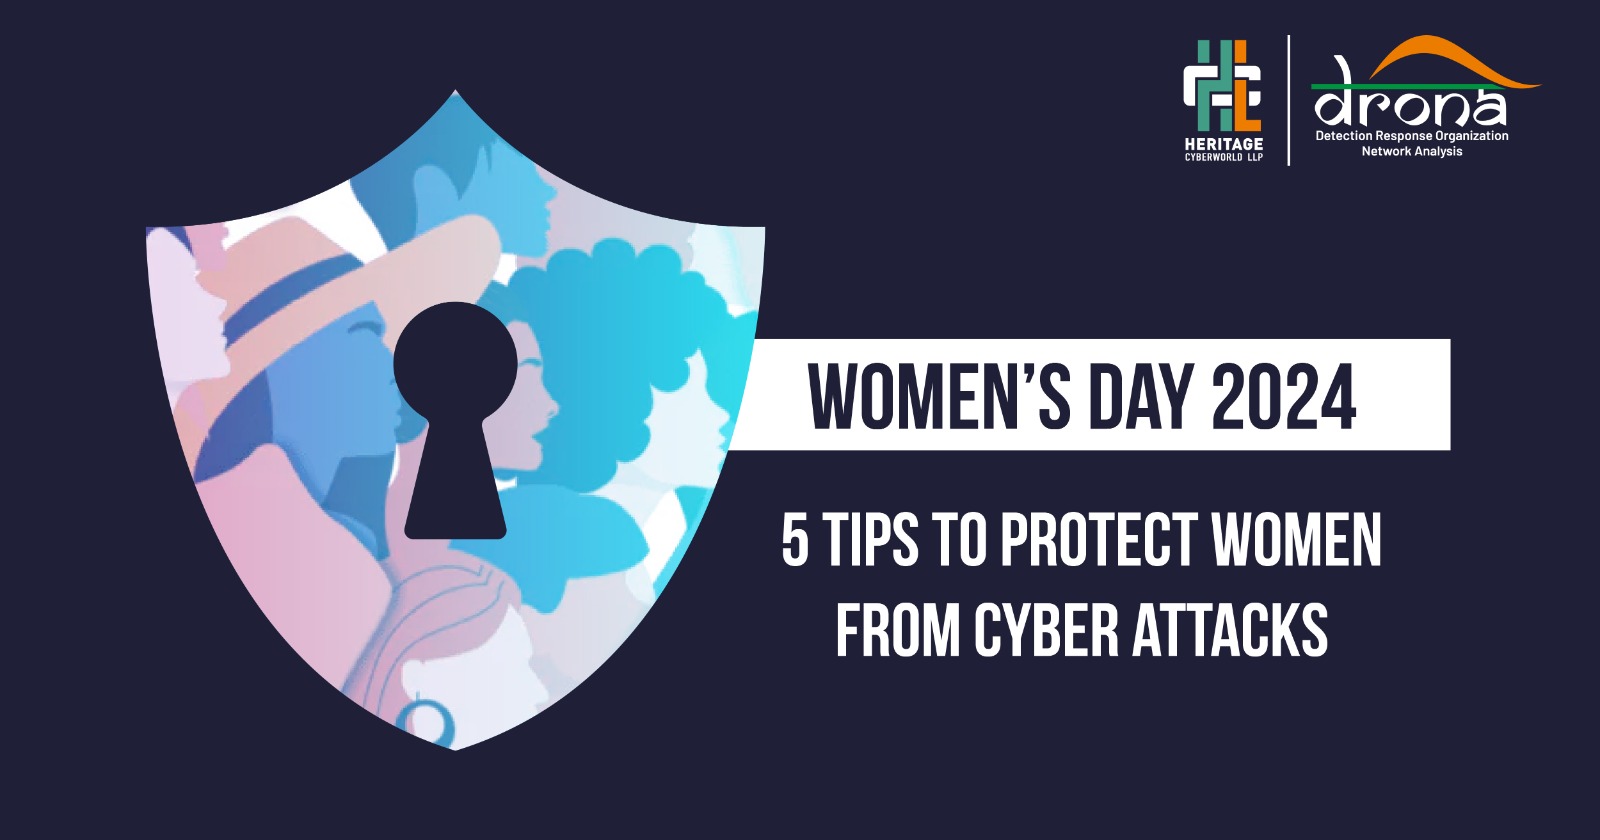 Women’s Day 2024: 5 Tips to Protect Women From Cyber Attacks